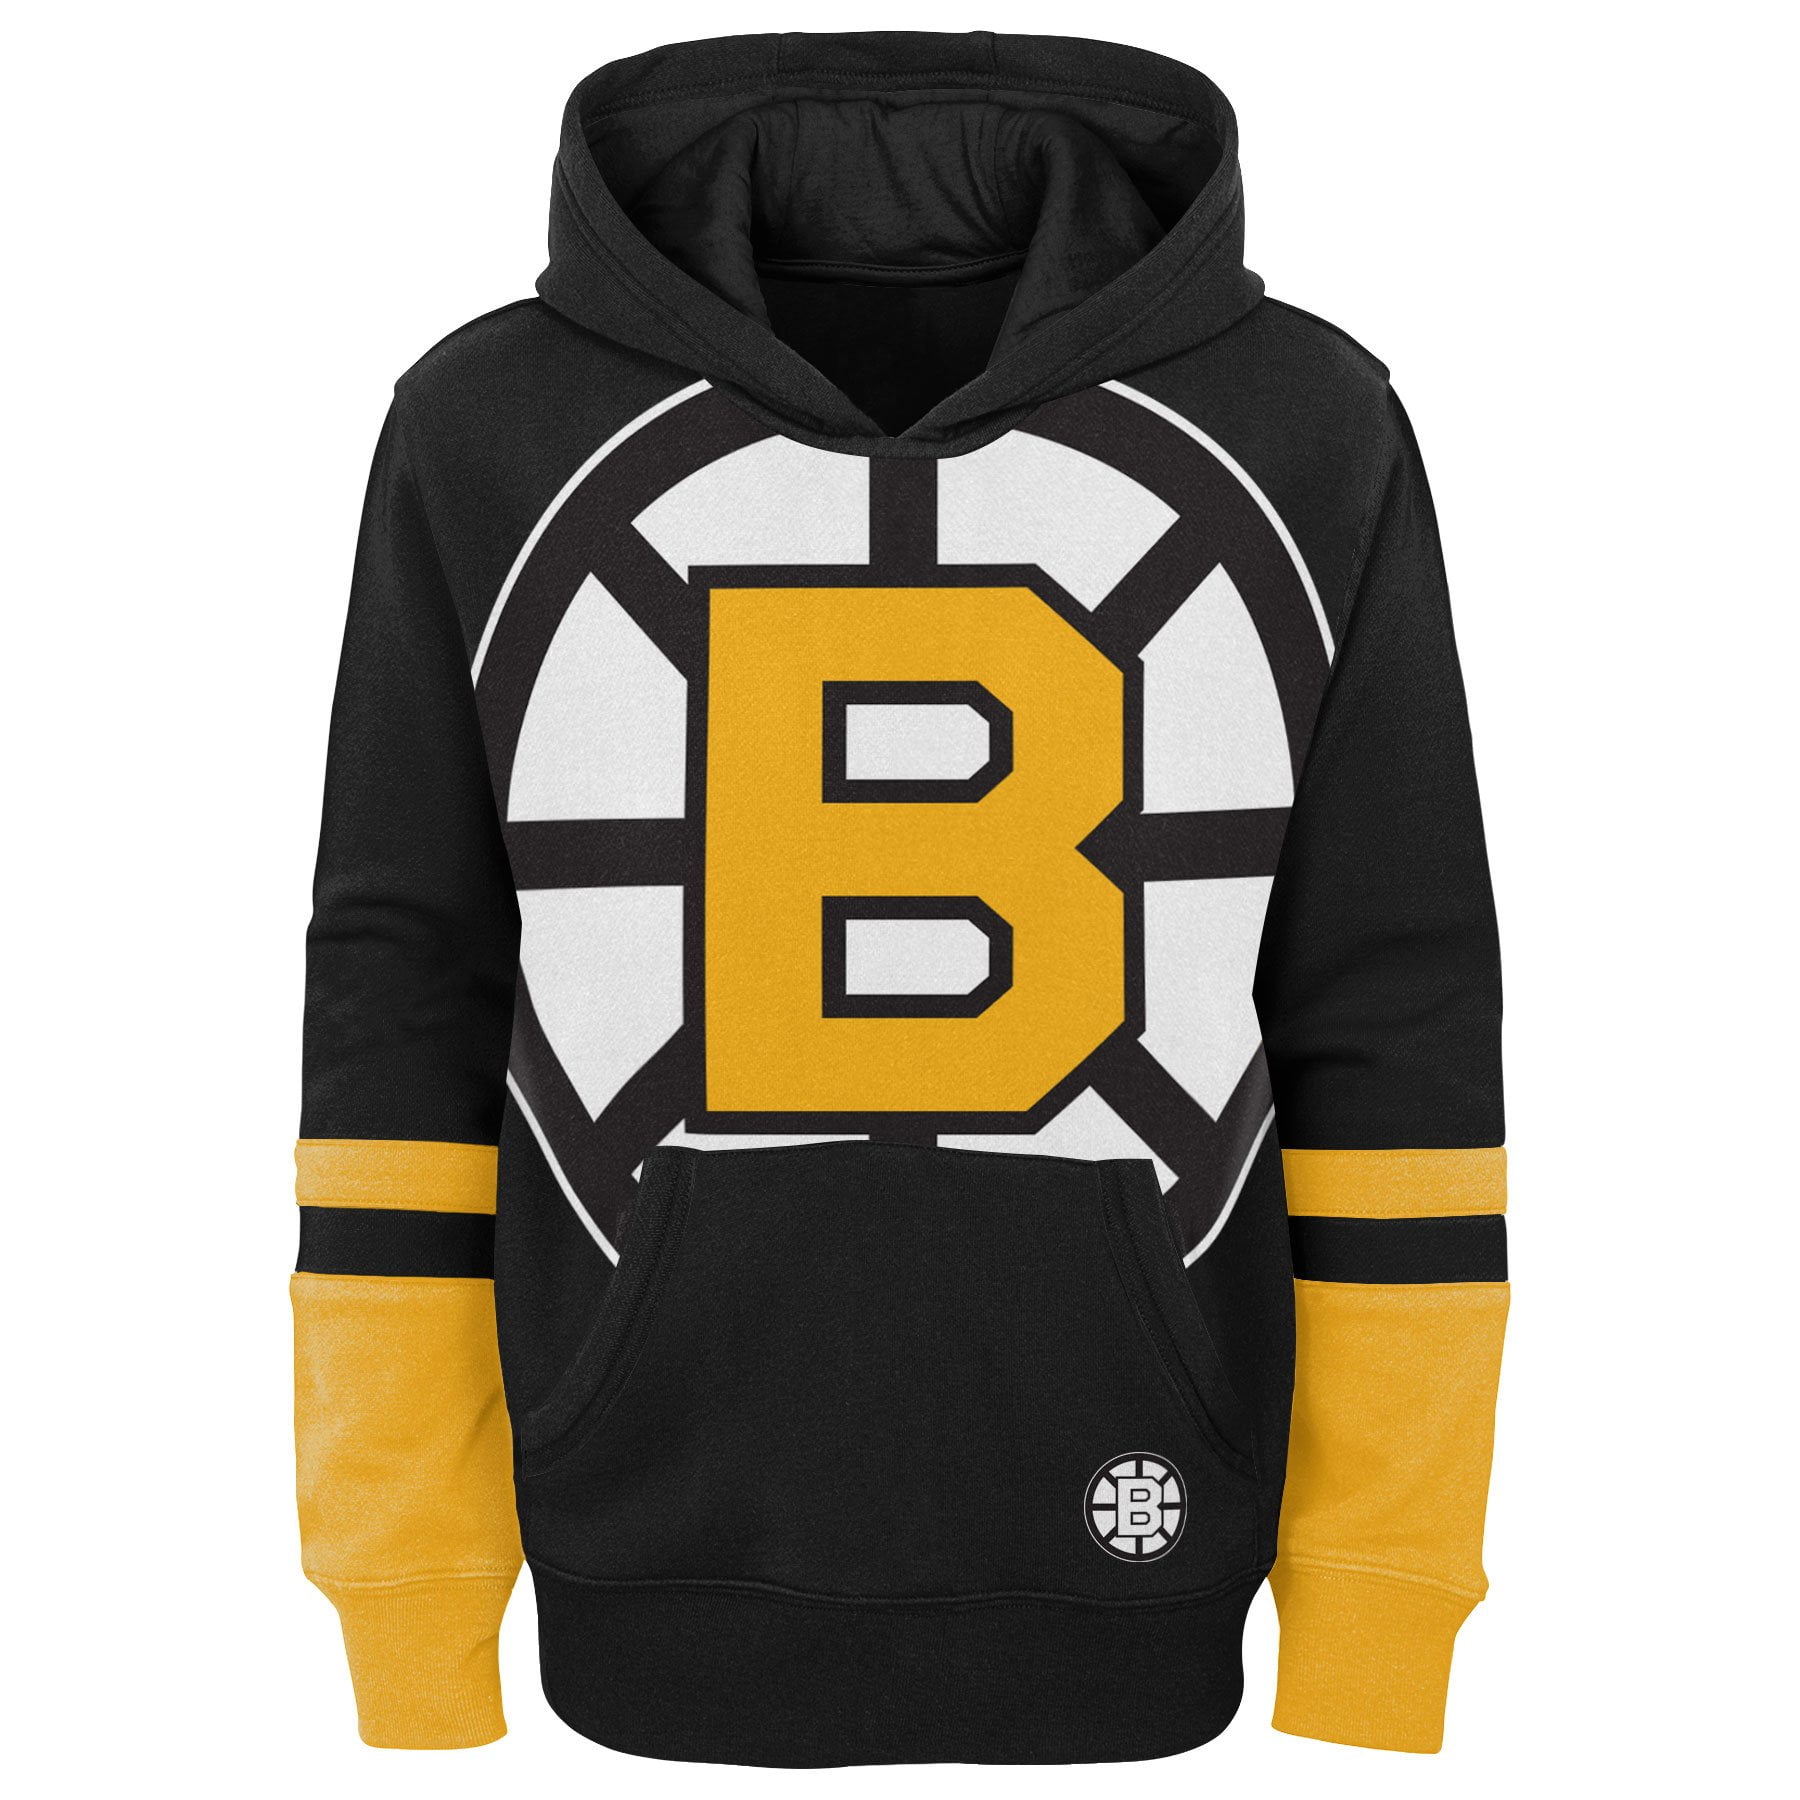 Outerstuff Prevail Hooded Pullover - Boston Bruins - Youth - Boston Bruins - M